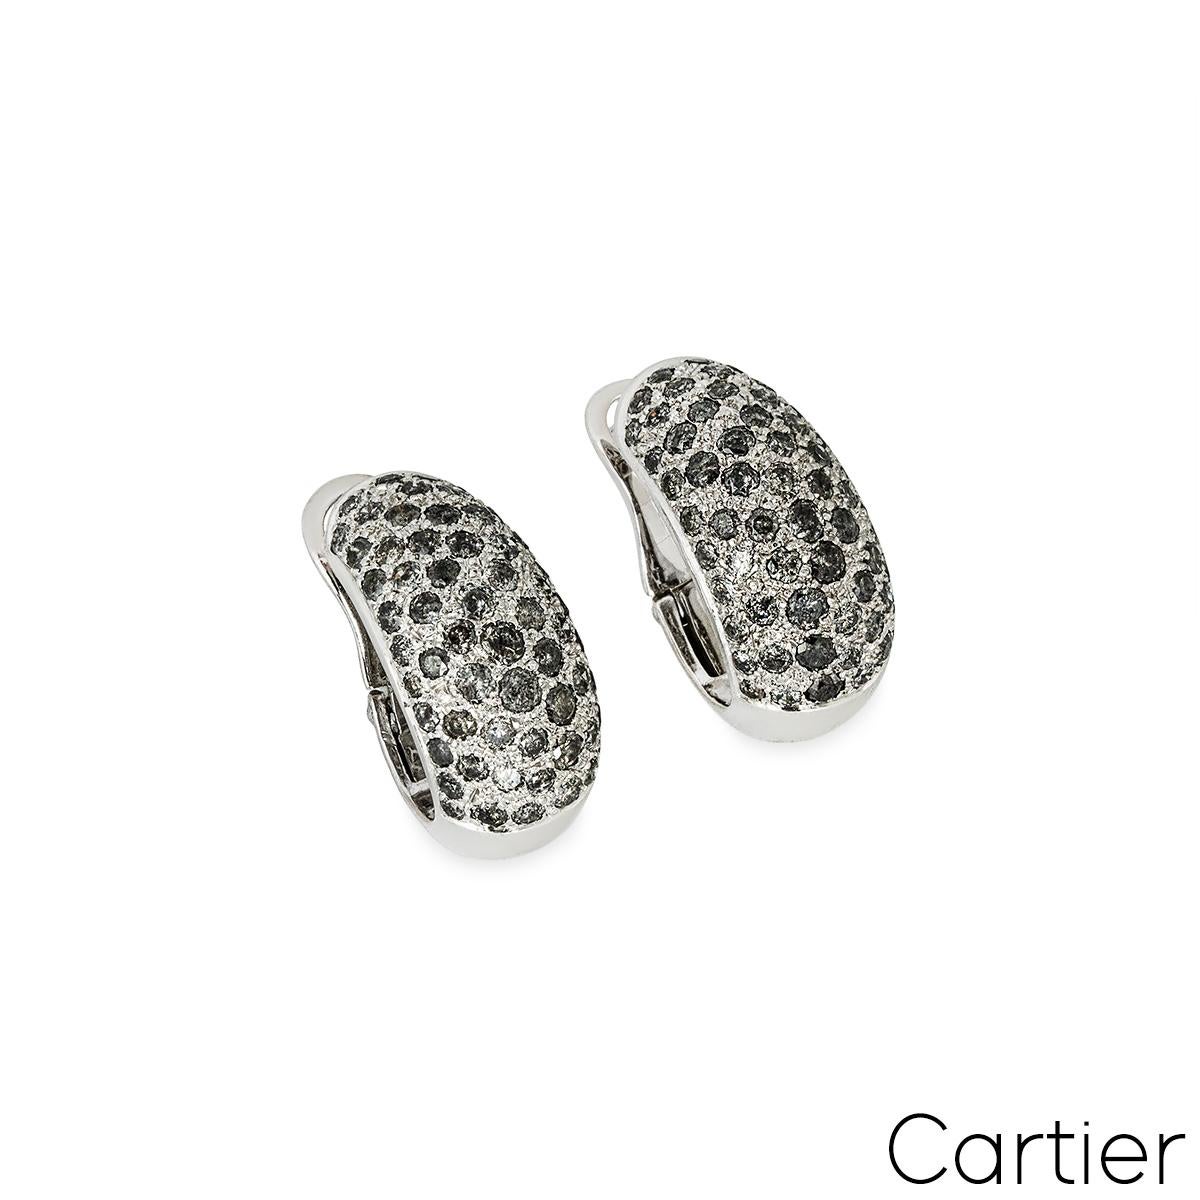 A stunning pair of 18k white gold clip-on earrings by Cartier from the Sauvage Metissage collection. Each bombe earring comprises of approximately 57 pave set grey round brilliant cut diamonds, with a total approximate weight of 2.20ct. The earrings